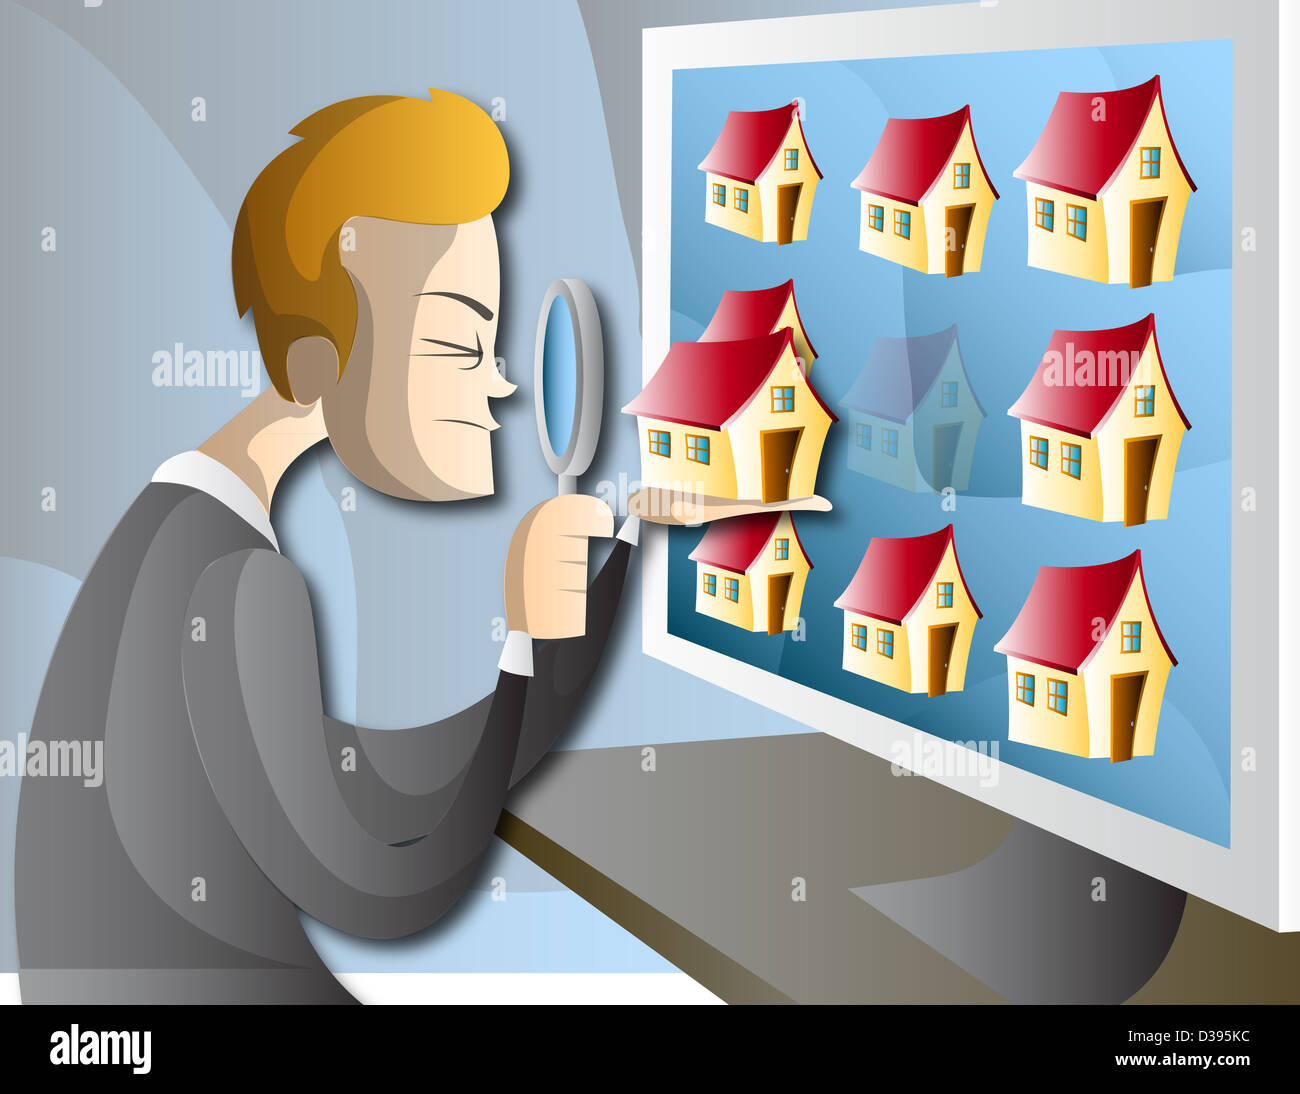 Illustration of man searching home online Stock Photo